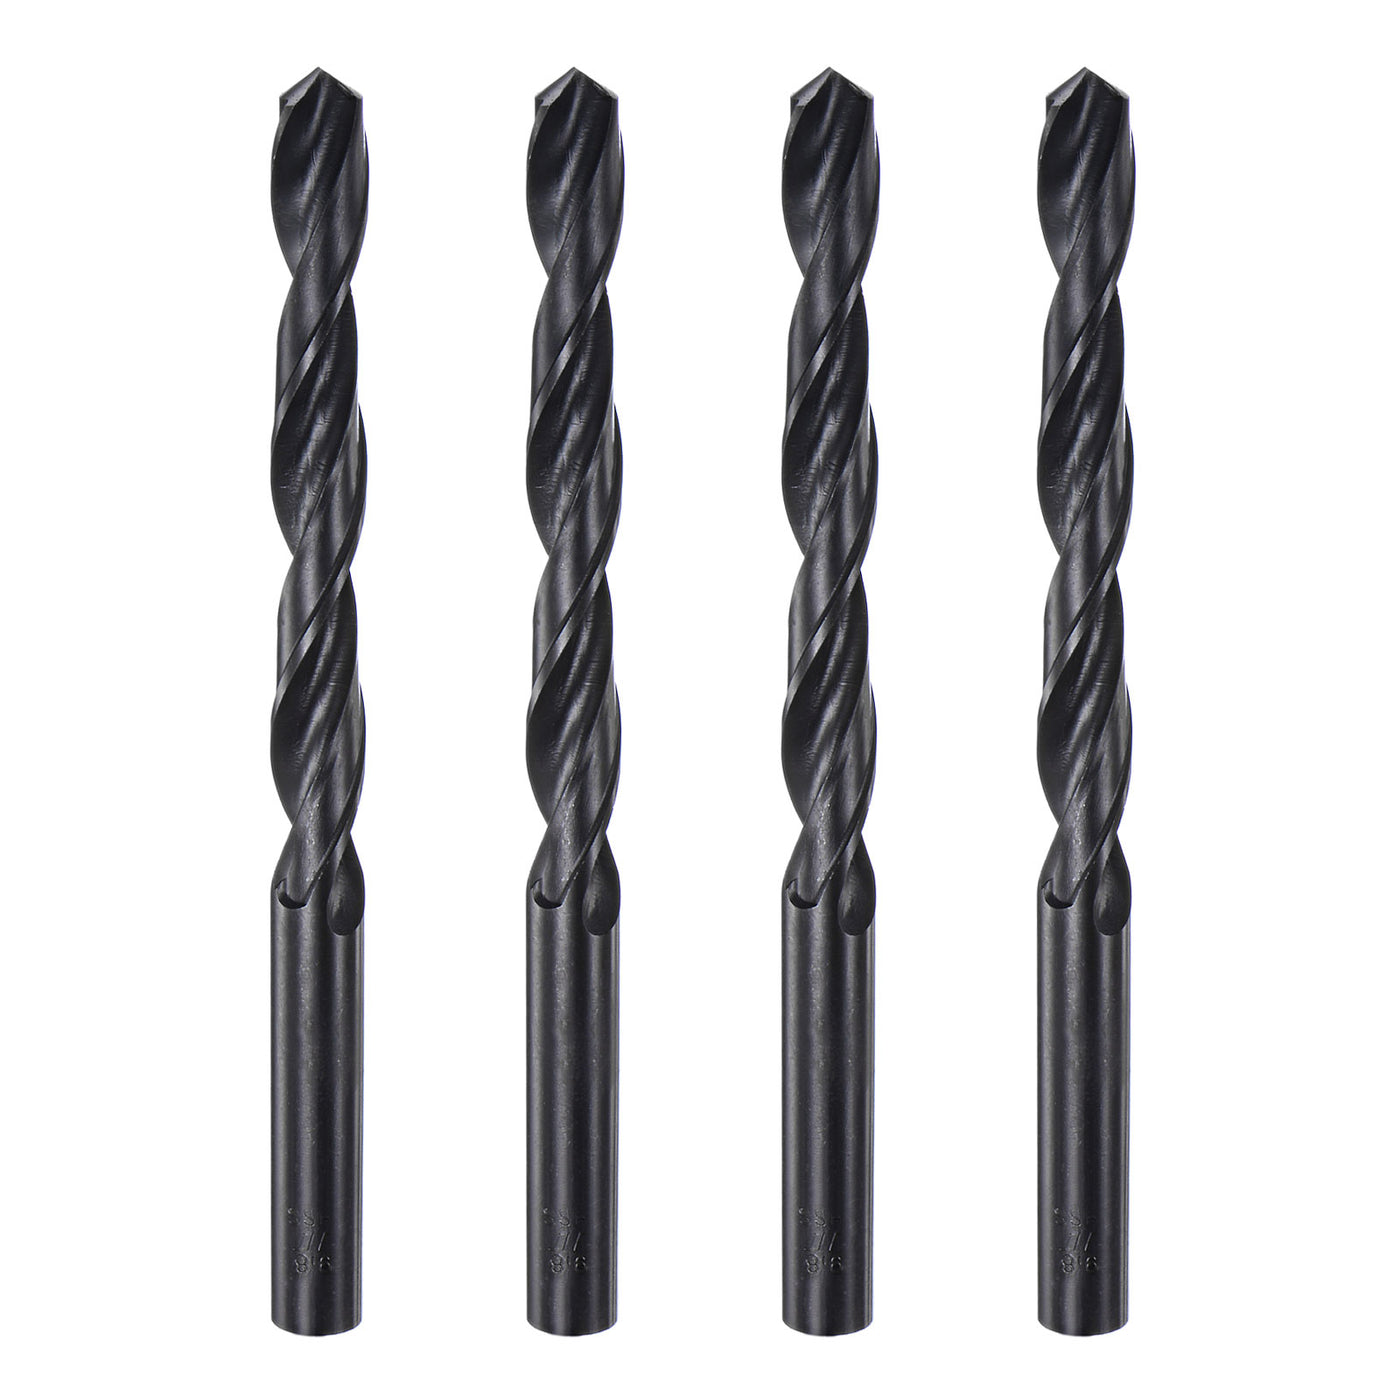 uxcell Uxcell High Speed Steel Twist Drill Bit, 9.8mm Fully Ground Black Oxide 133mm Long 4Pcs